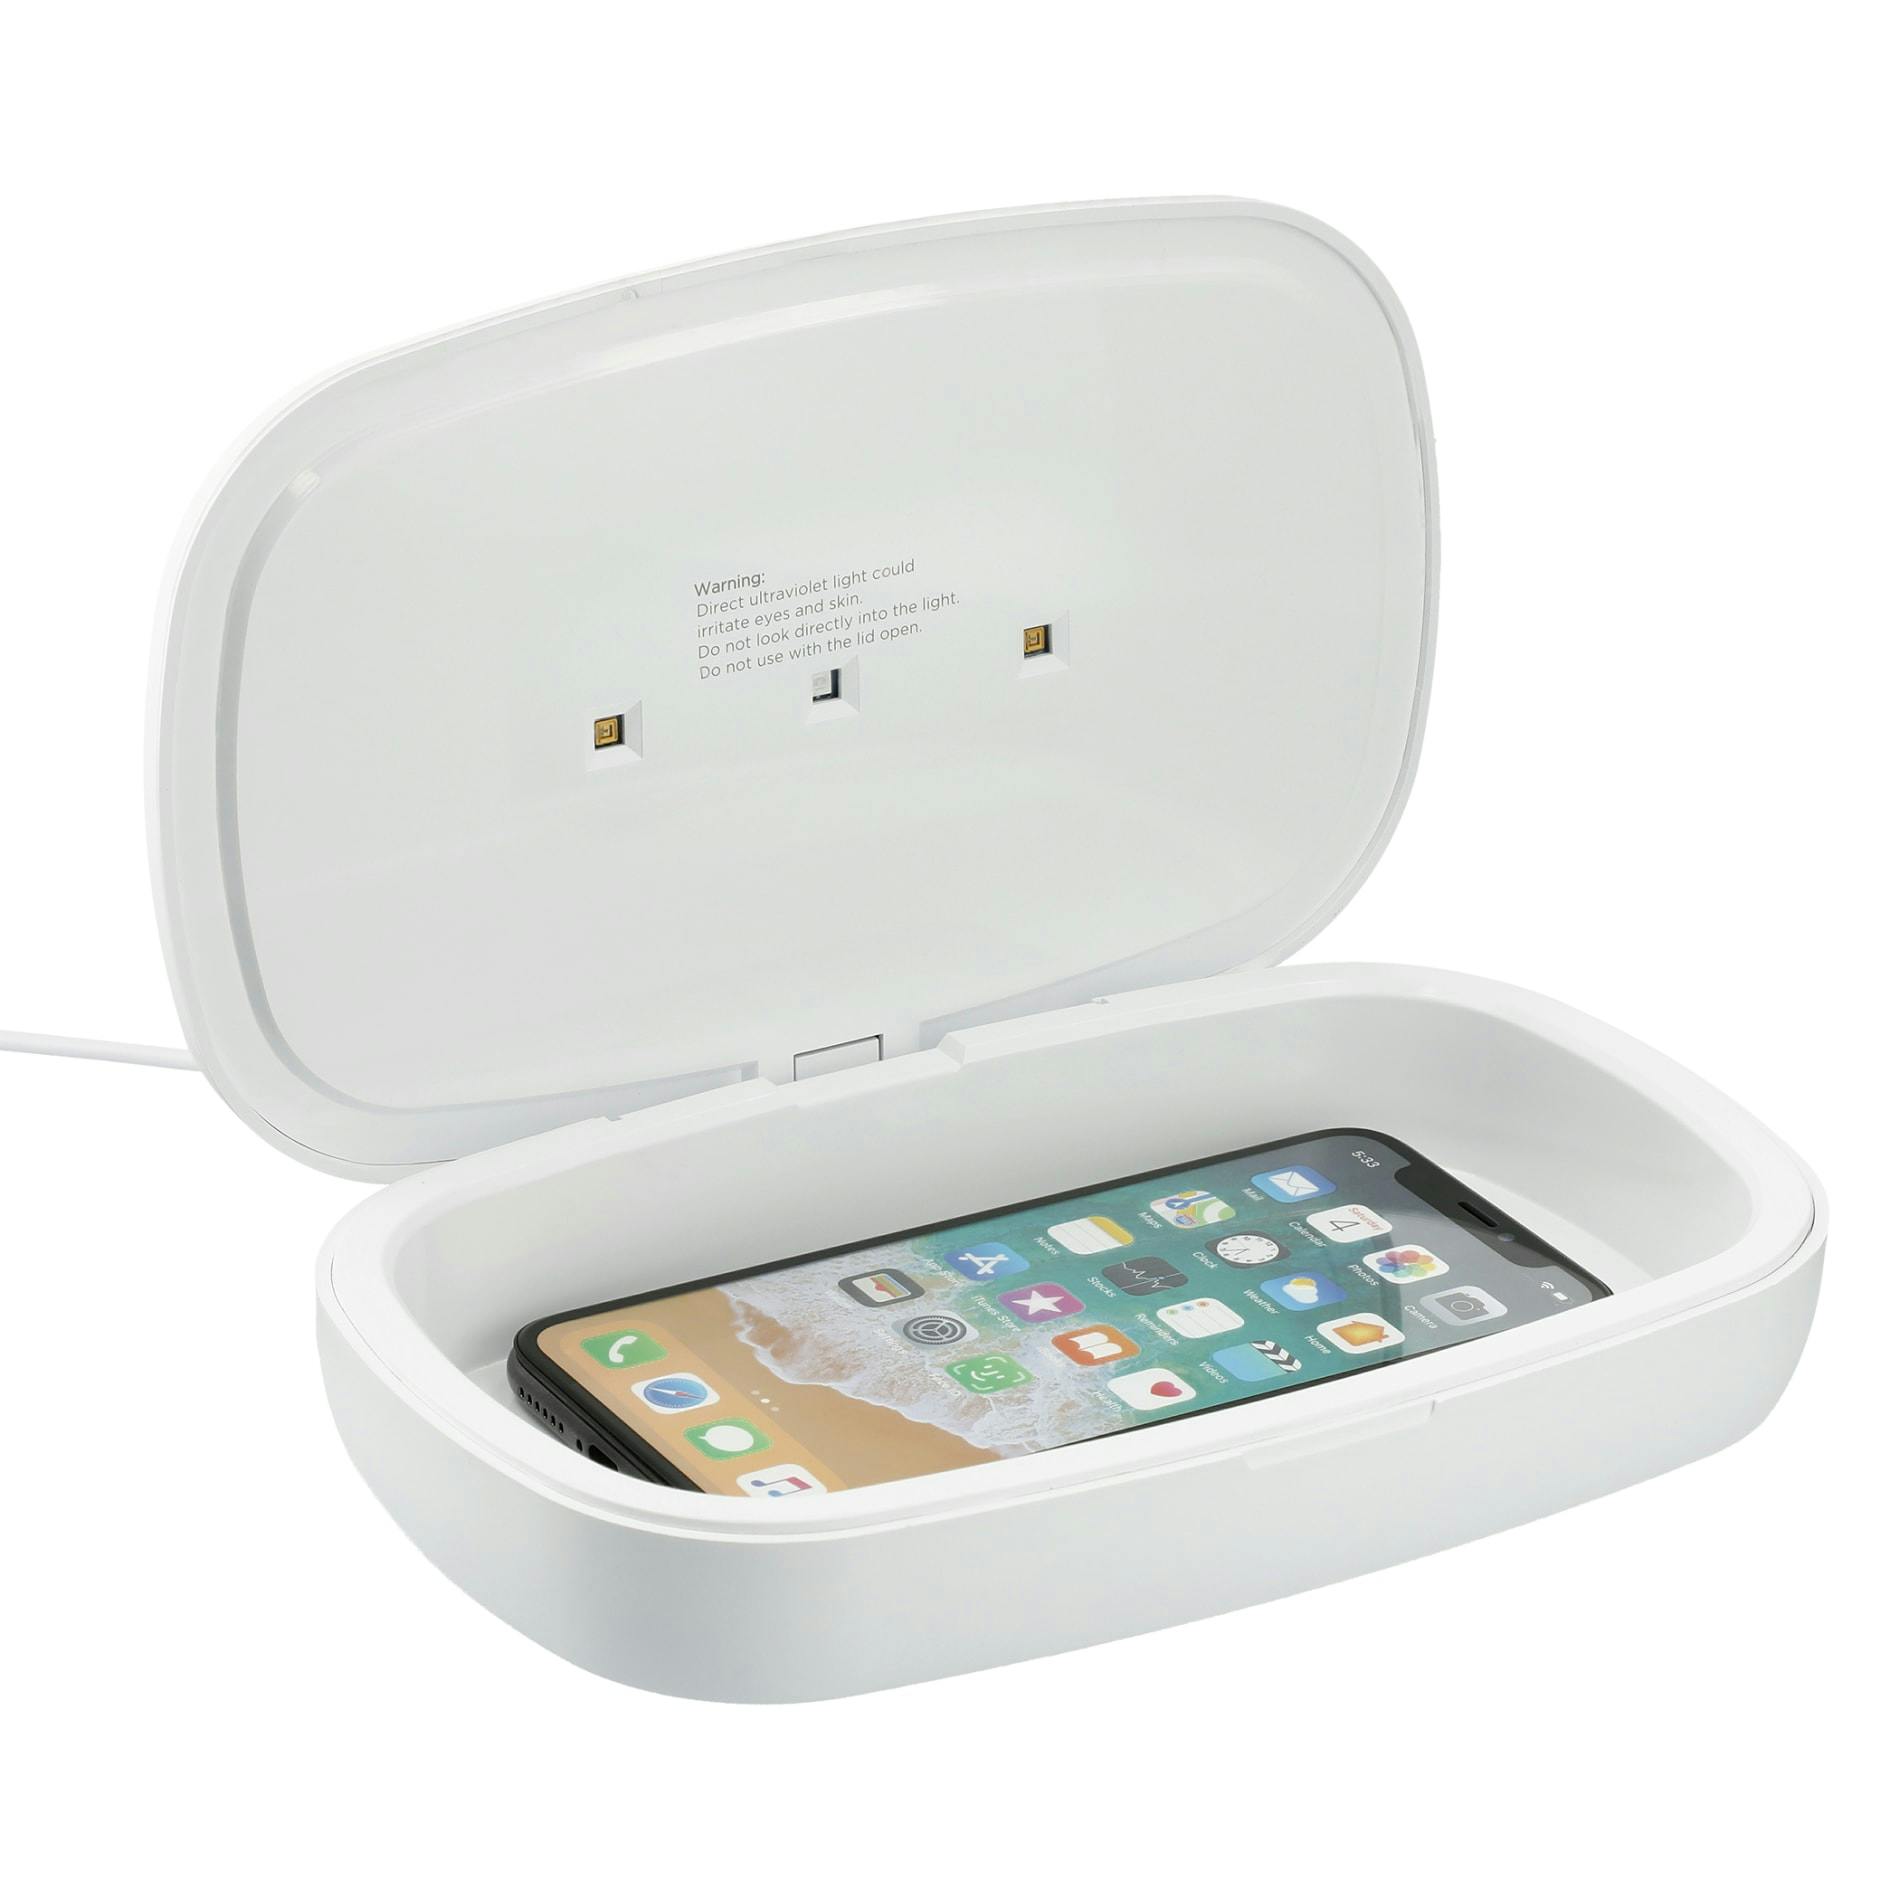 UV Phone Sanitizer with Wireless Charging Pad - additional Image 6